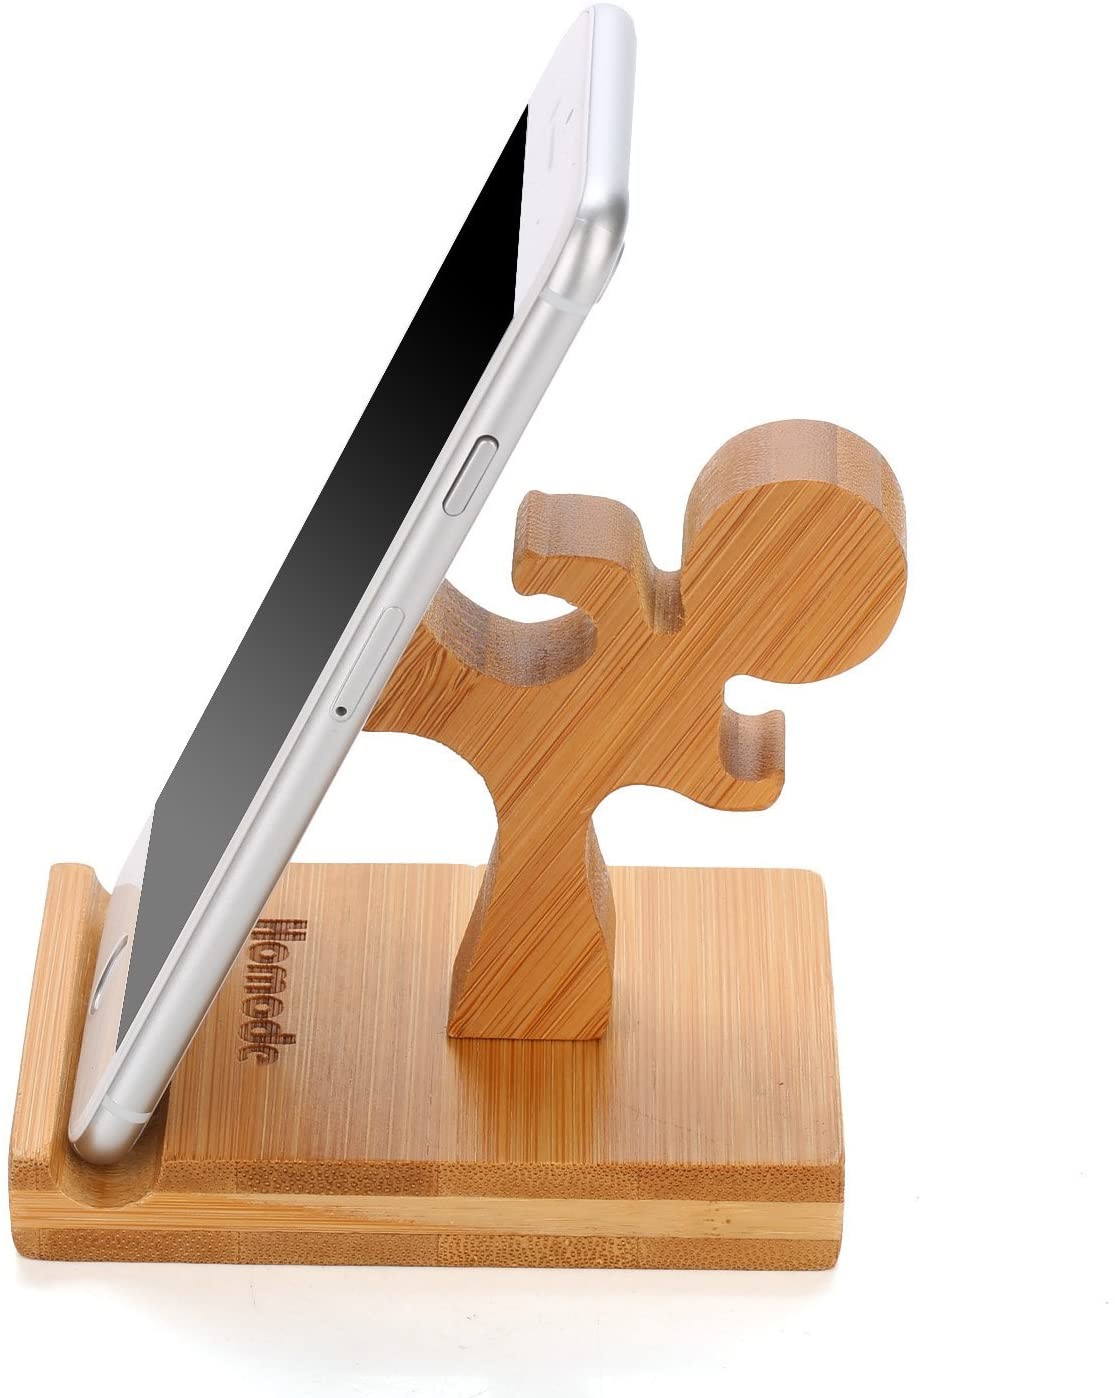 Bamboo Wood Phone Holder and Cute Phone Stand Compatible with iPhone 11 Pro X Plus 8 7 6, Ipad